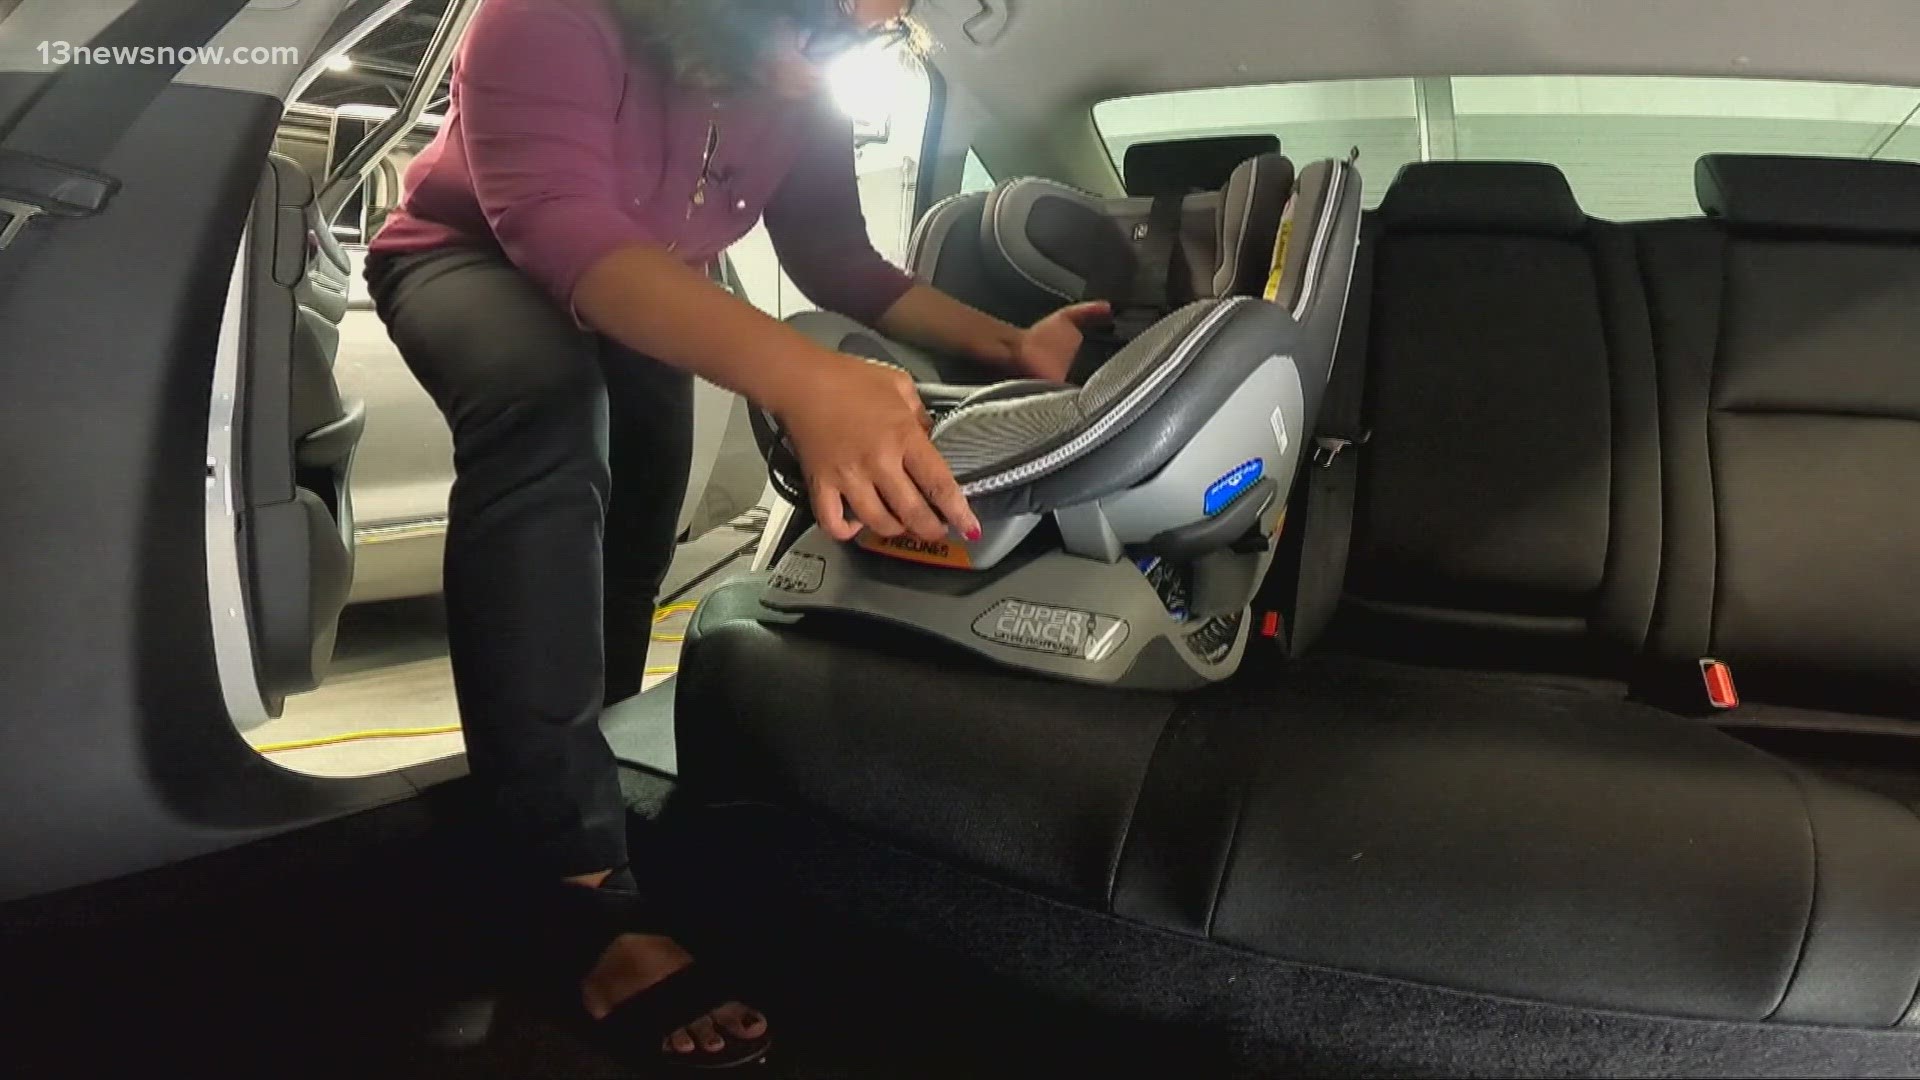 With so many car seats to choose from, Consumer Reports conducts crash tests to help determine its top-rated picks for safety.